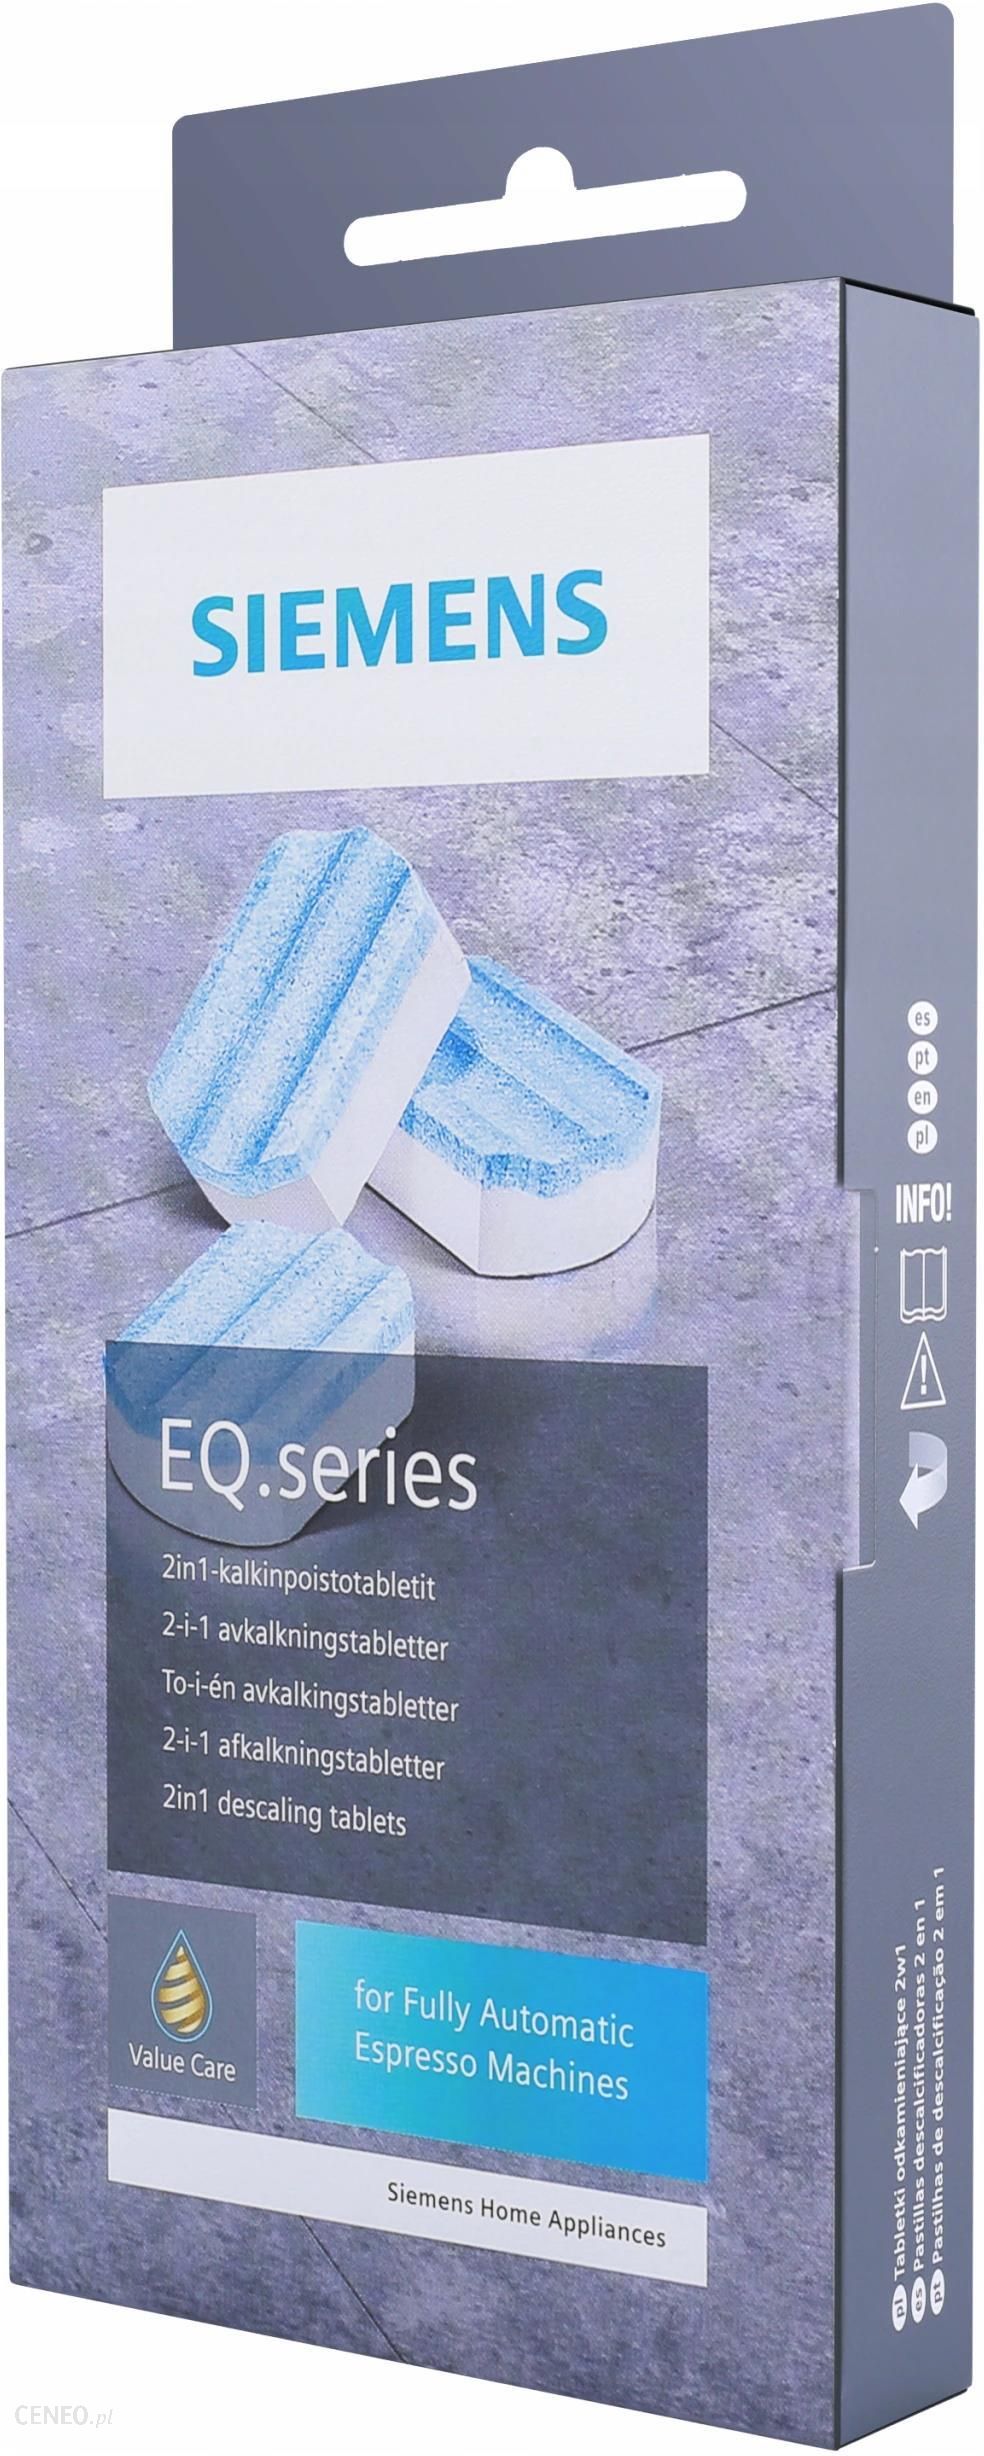 3x Water Filter, Descaler TZ80002 Cleaning Tablets TZ80001 For